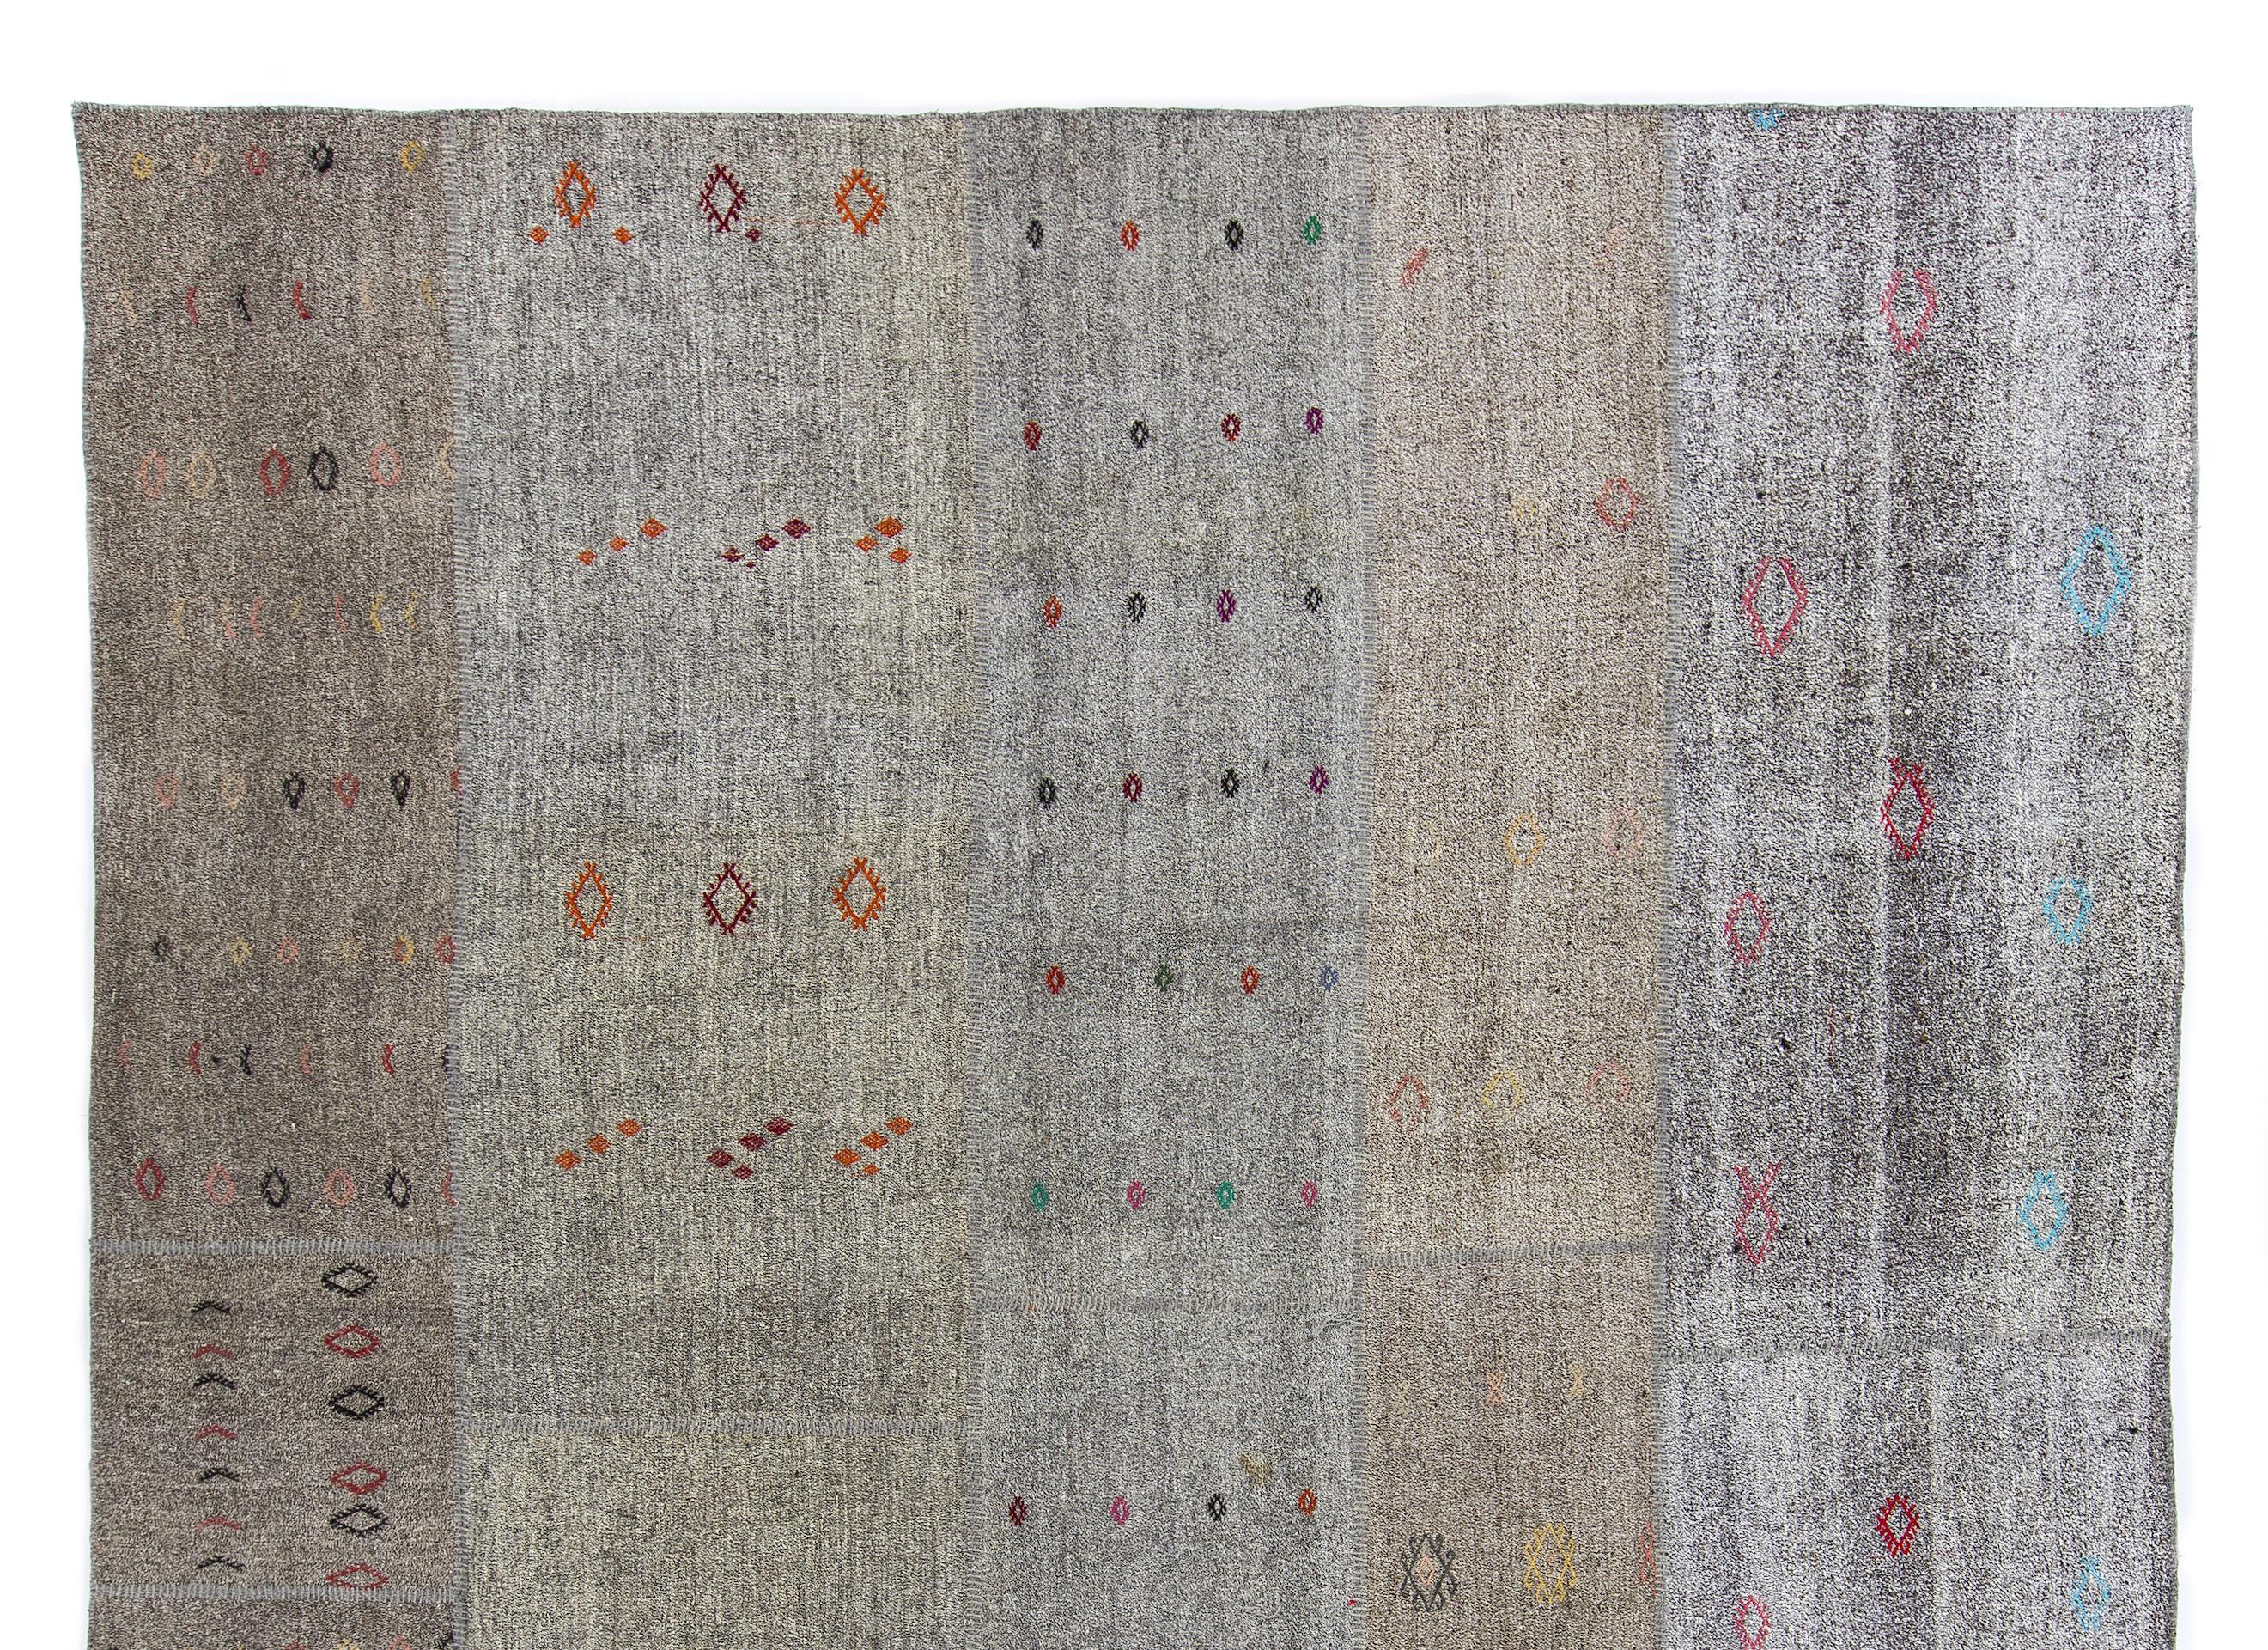 An elegant vintage handwoven Turkish Kilim (flat-weave) with a neutral palette of warm grays and browns including khaki, light fawn and taupe. It is a banded Kilim with colorful fertility motifs on every individually hand sewn piece, handwoven from